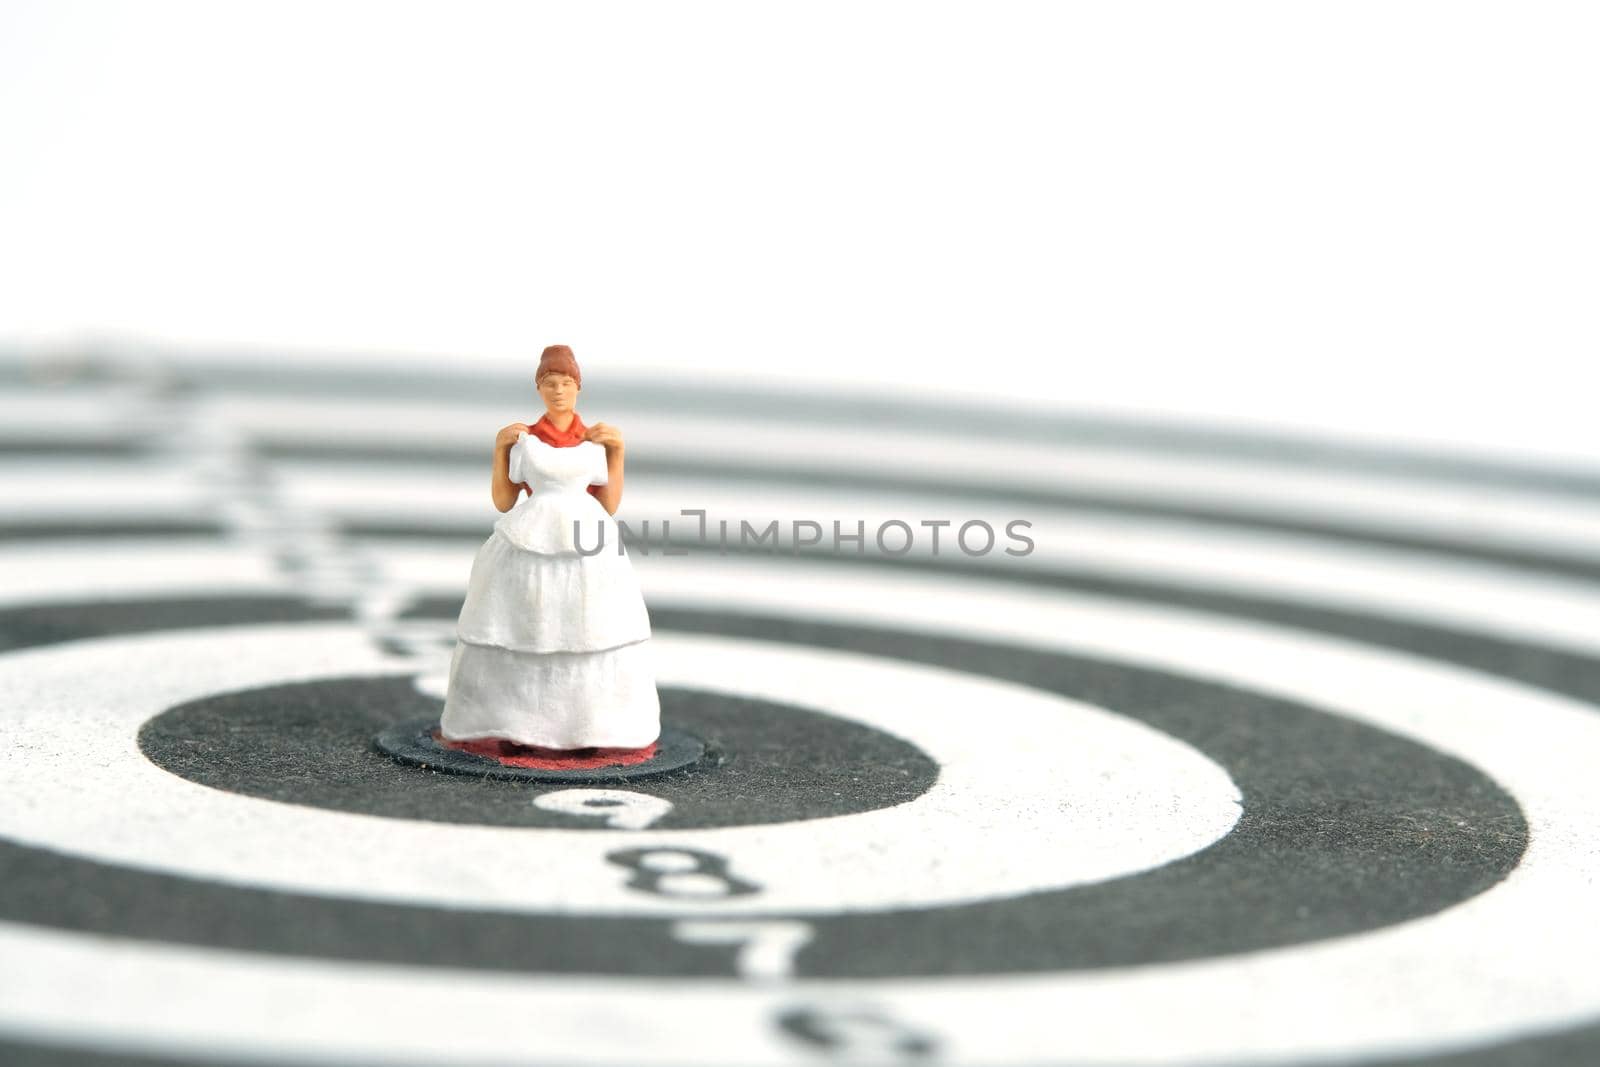 Wedding married target goal conceptual miniature people toy photography. Women trying wedding dress standing on dartboard. Image photo by Macrostud